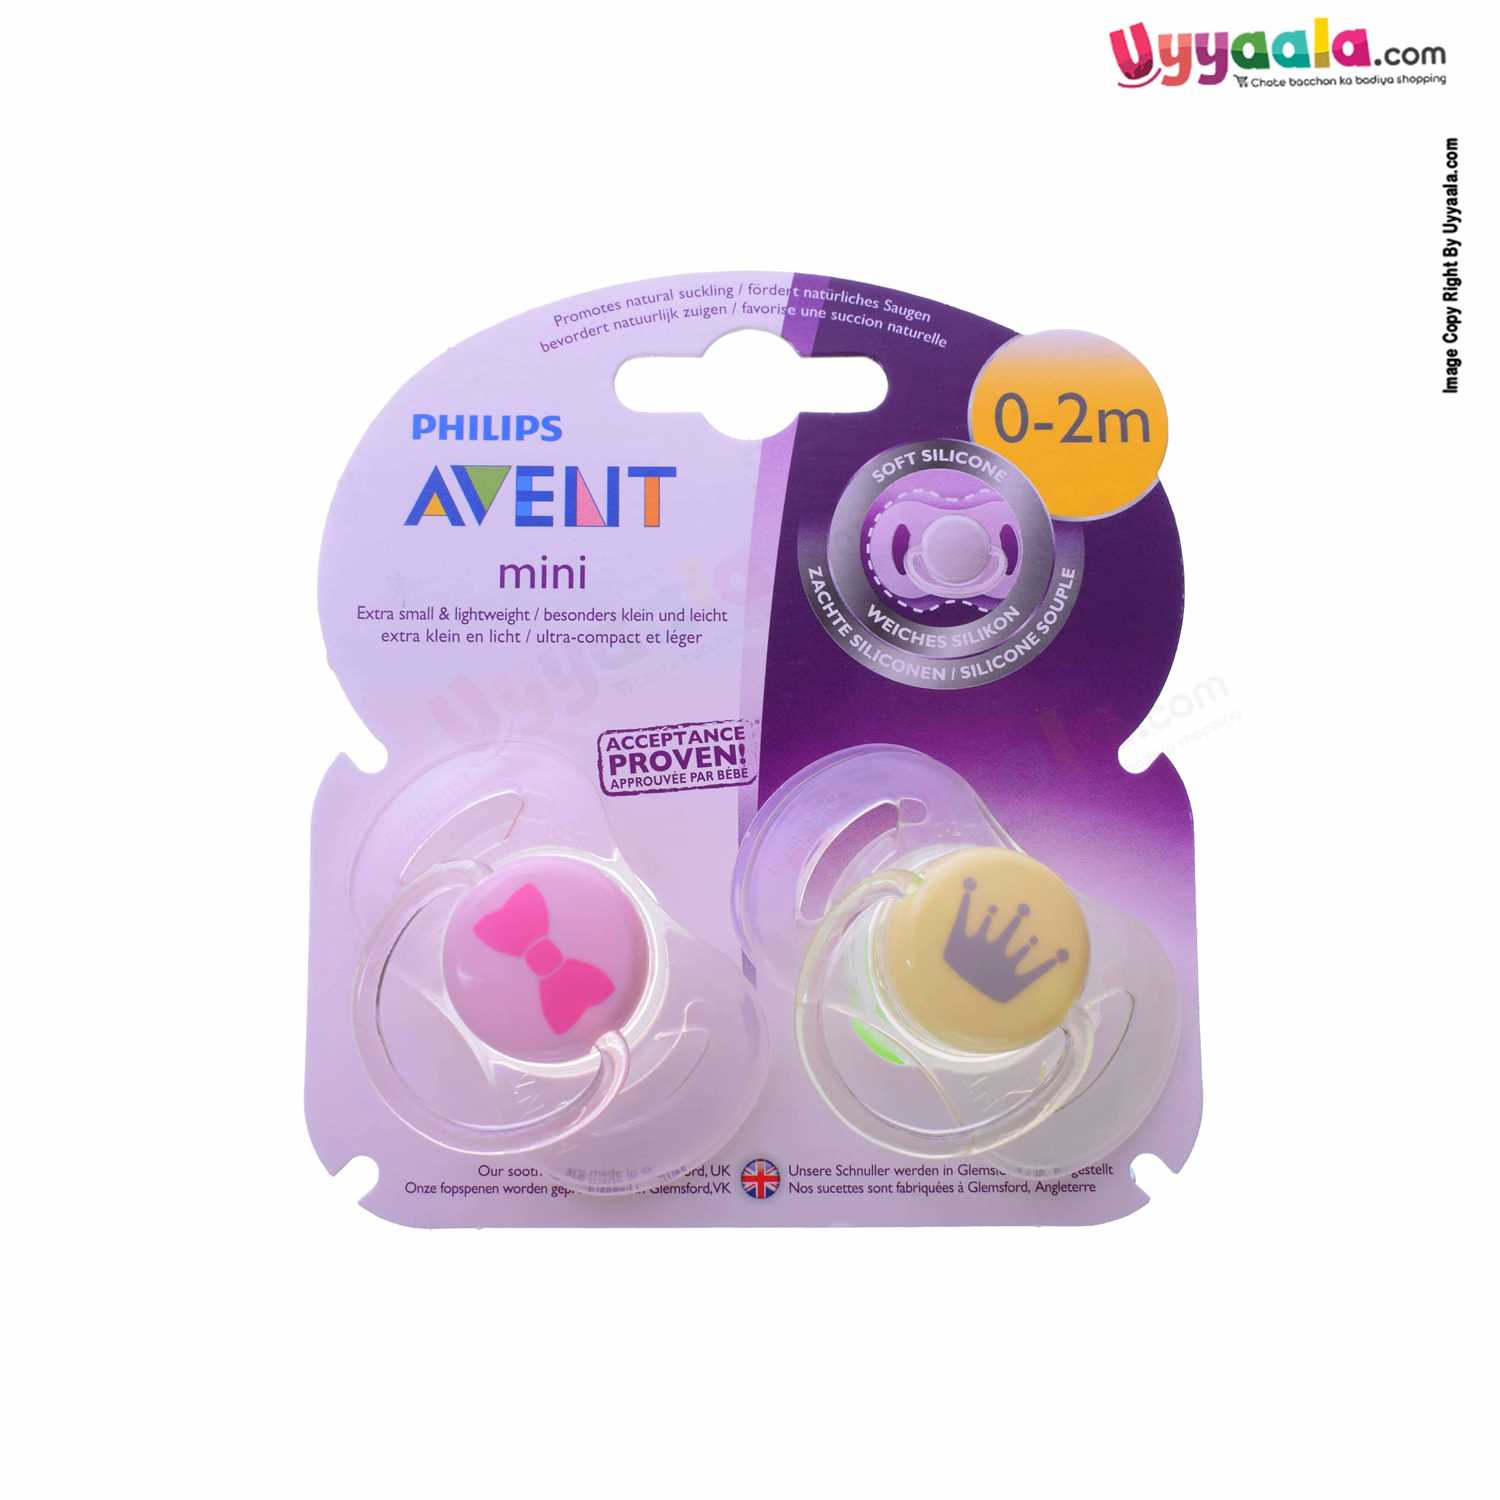 PHILIPS AVENT Extra Air Flow Soother for Babies Twin Pack 0-2m Age, Tye Print Pink & Crown Print Yellow